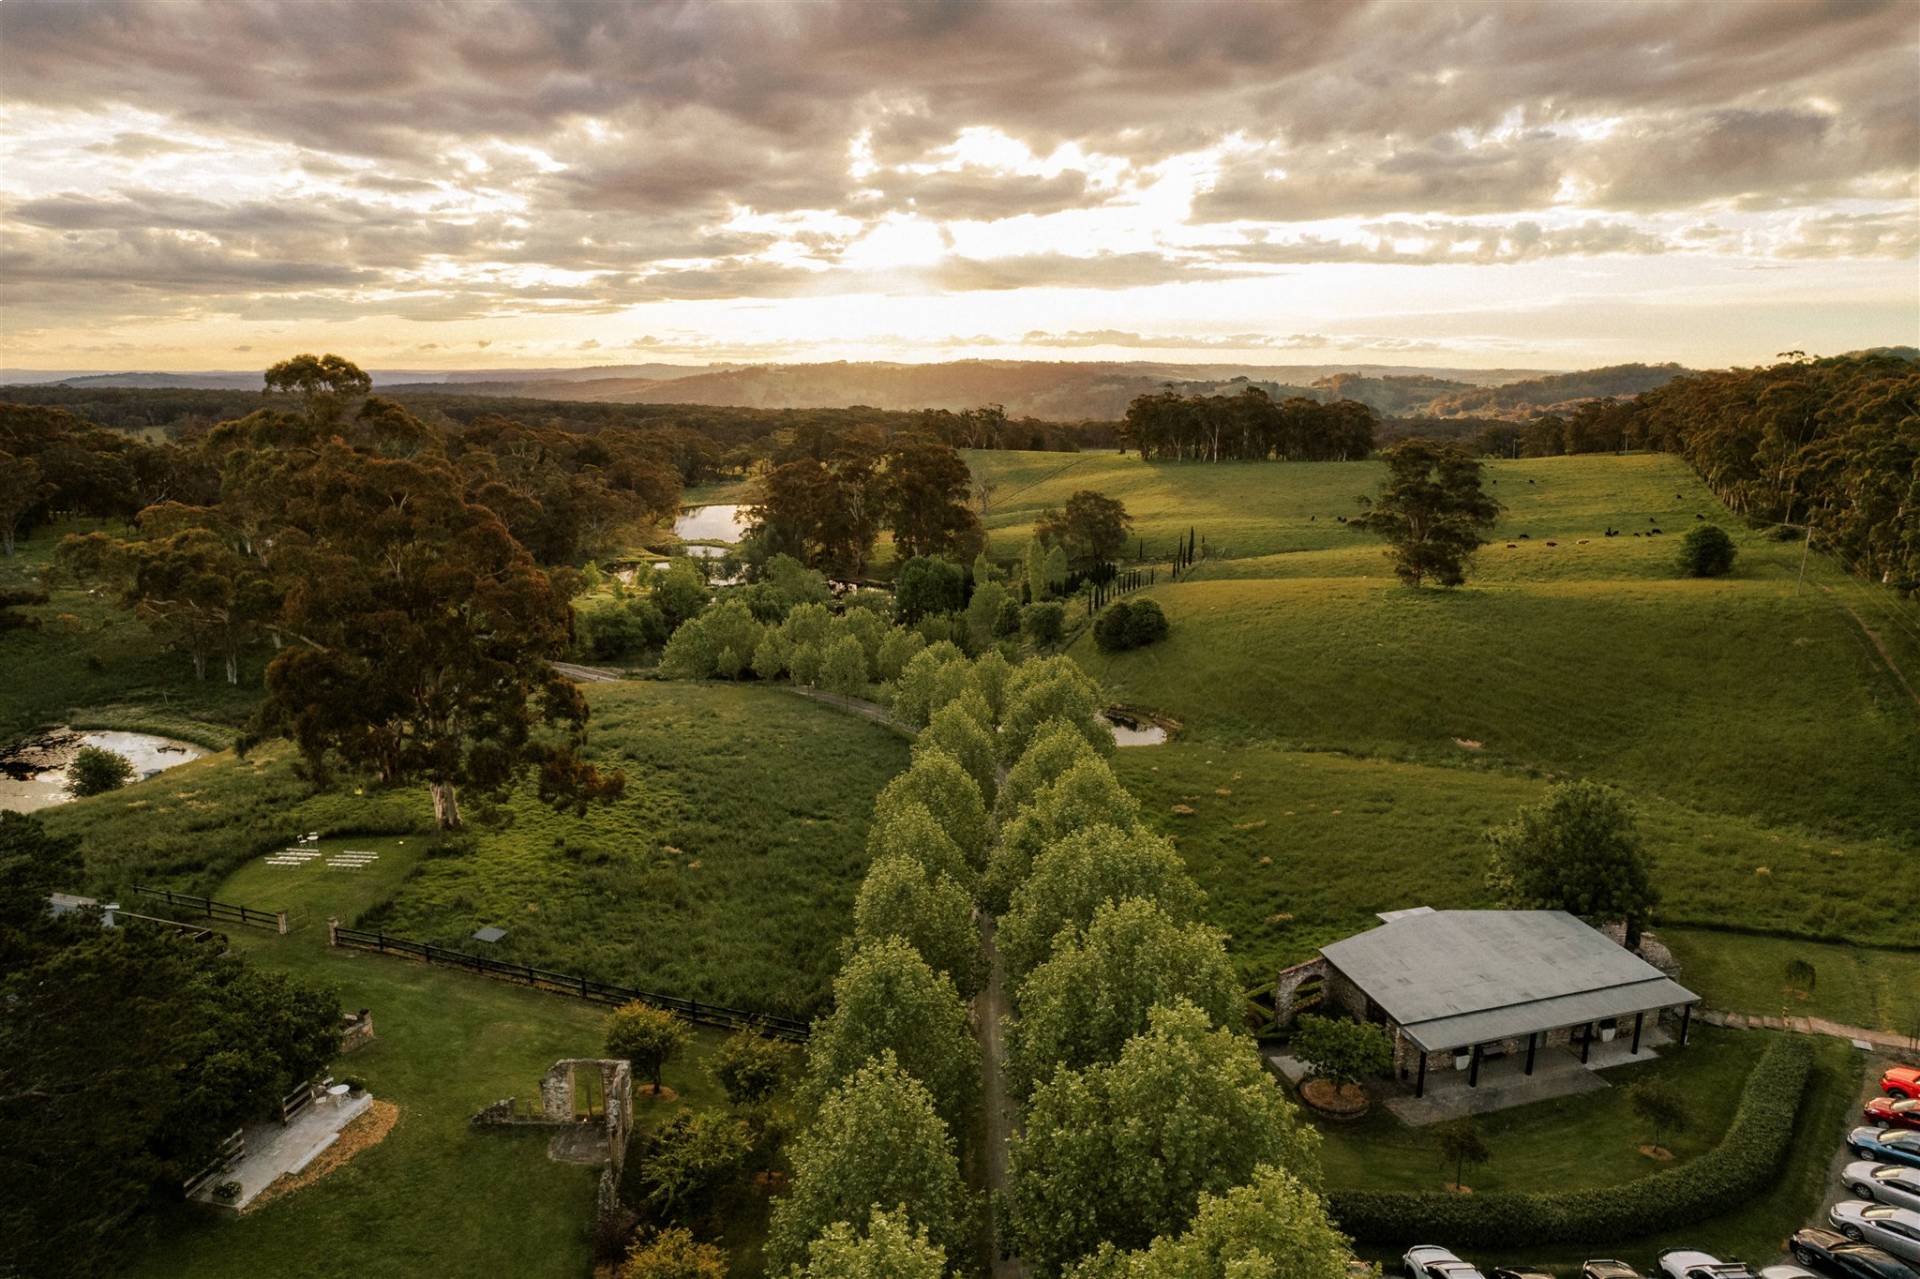 Aerial view of a lush wedding venue at sunset, with green fields, a pond, and a rustic building, under a dramatic sky